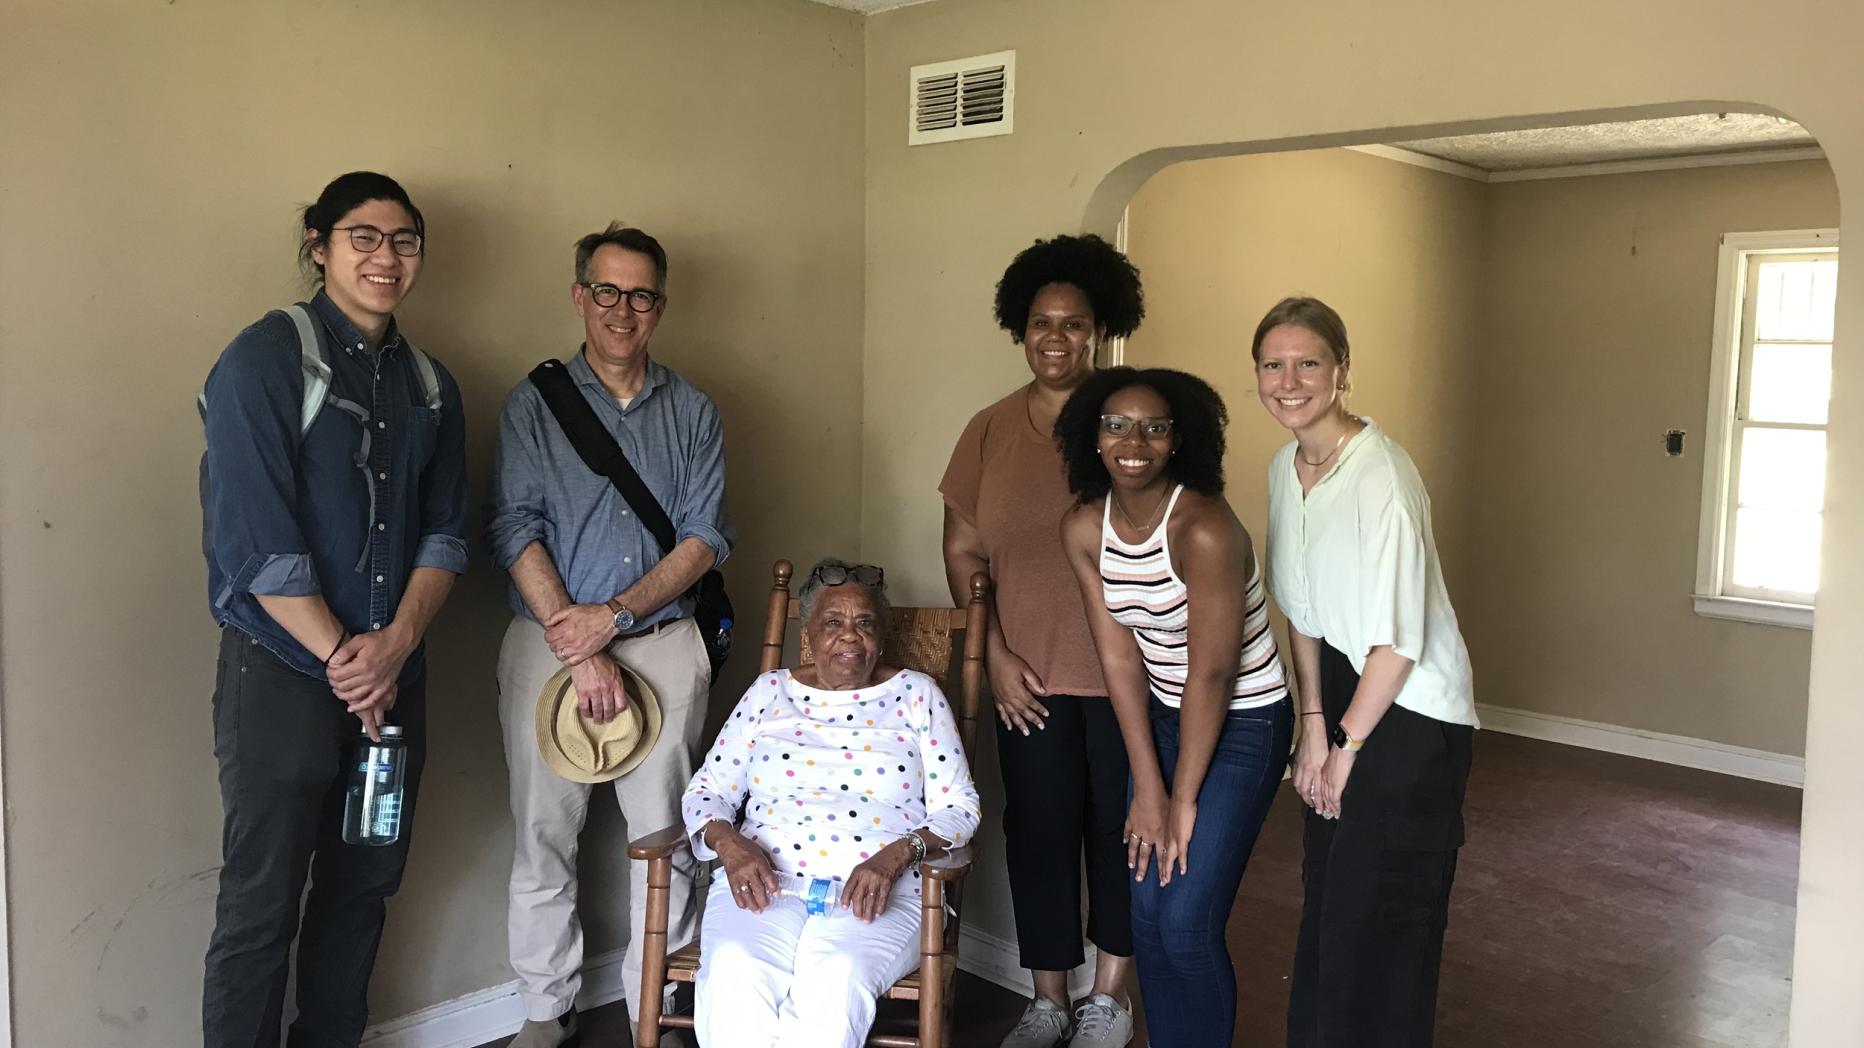 The CPCRS site assessment team with Mrs. Willodean Malden, member of the preservation council for the Trinity Lutheran Parsonage